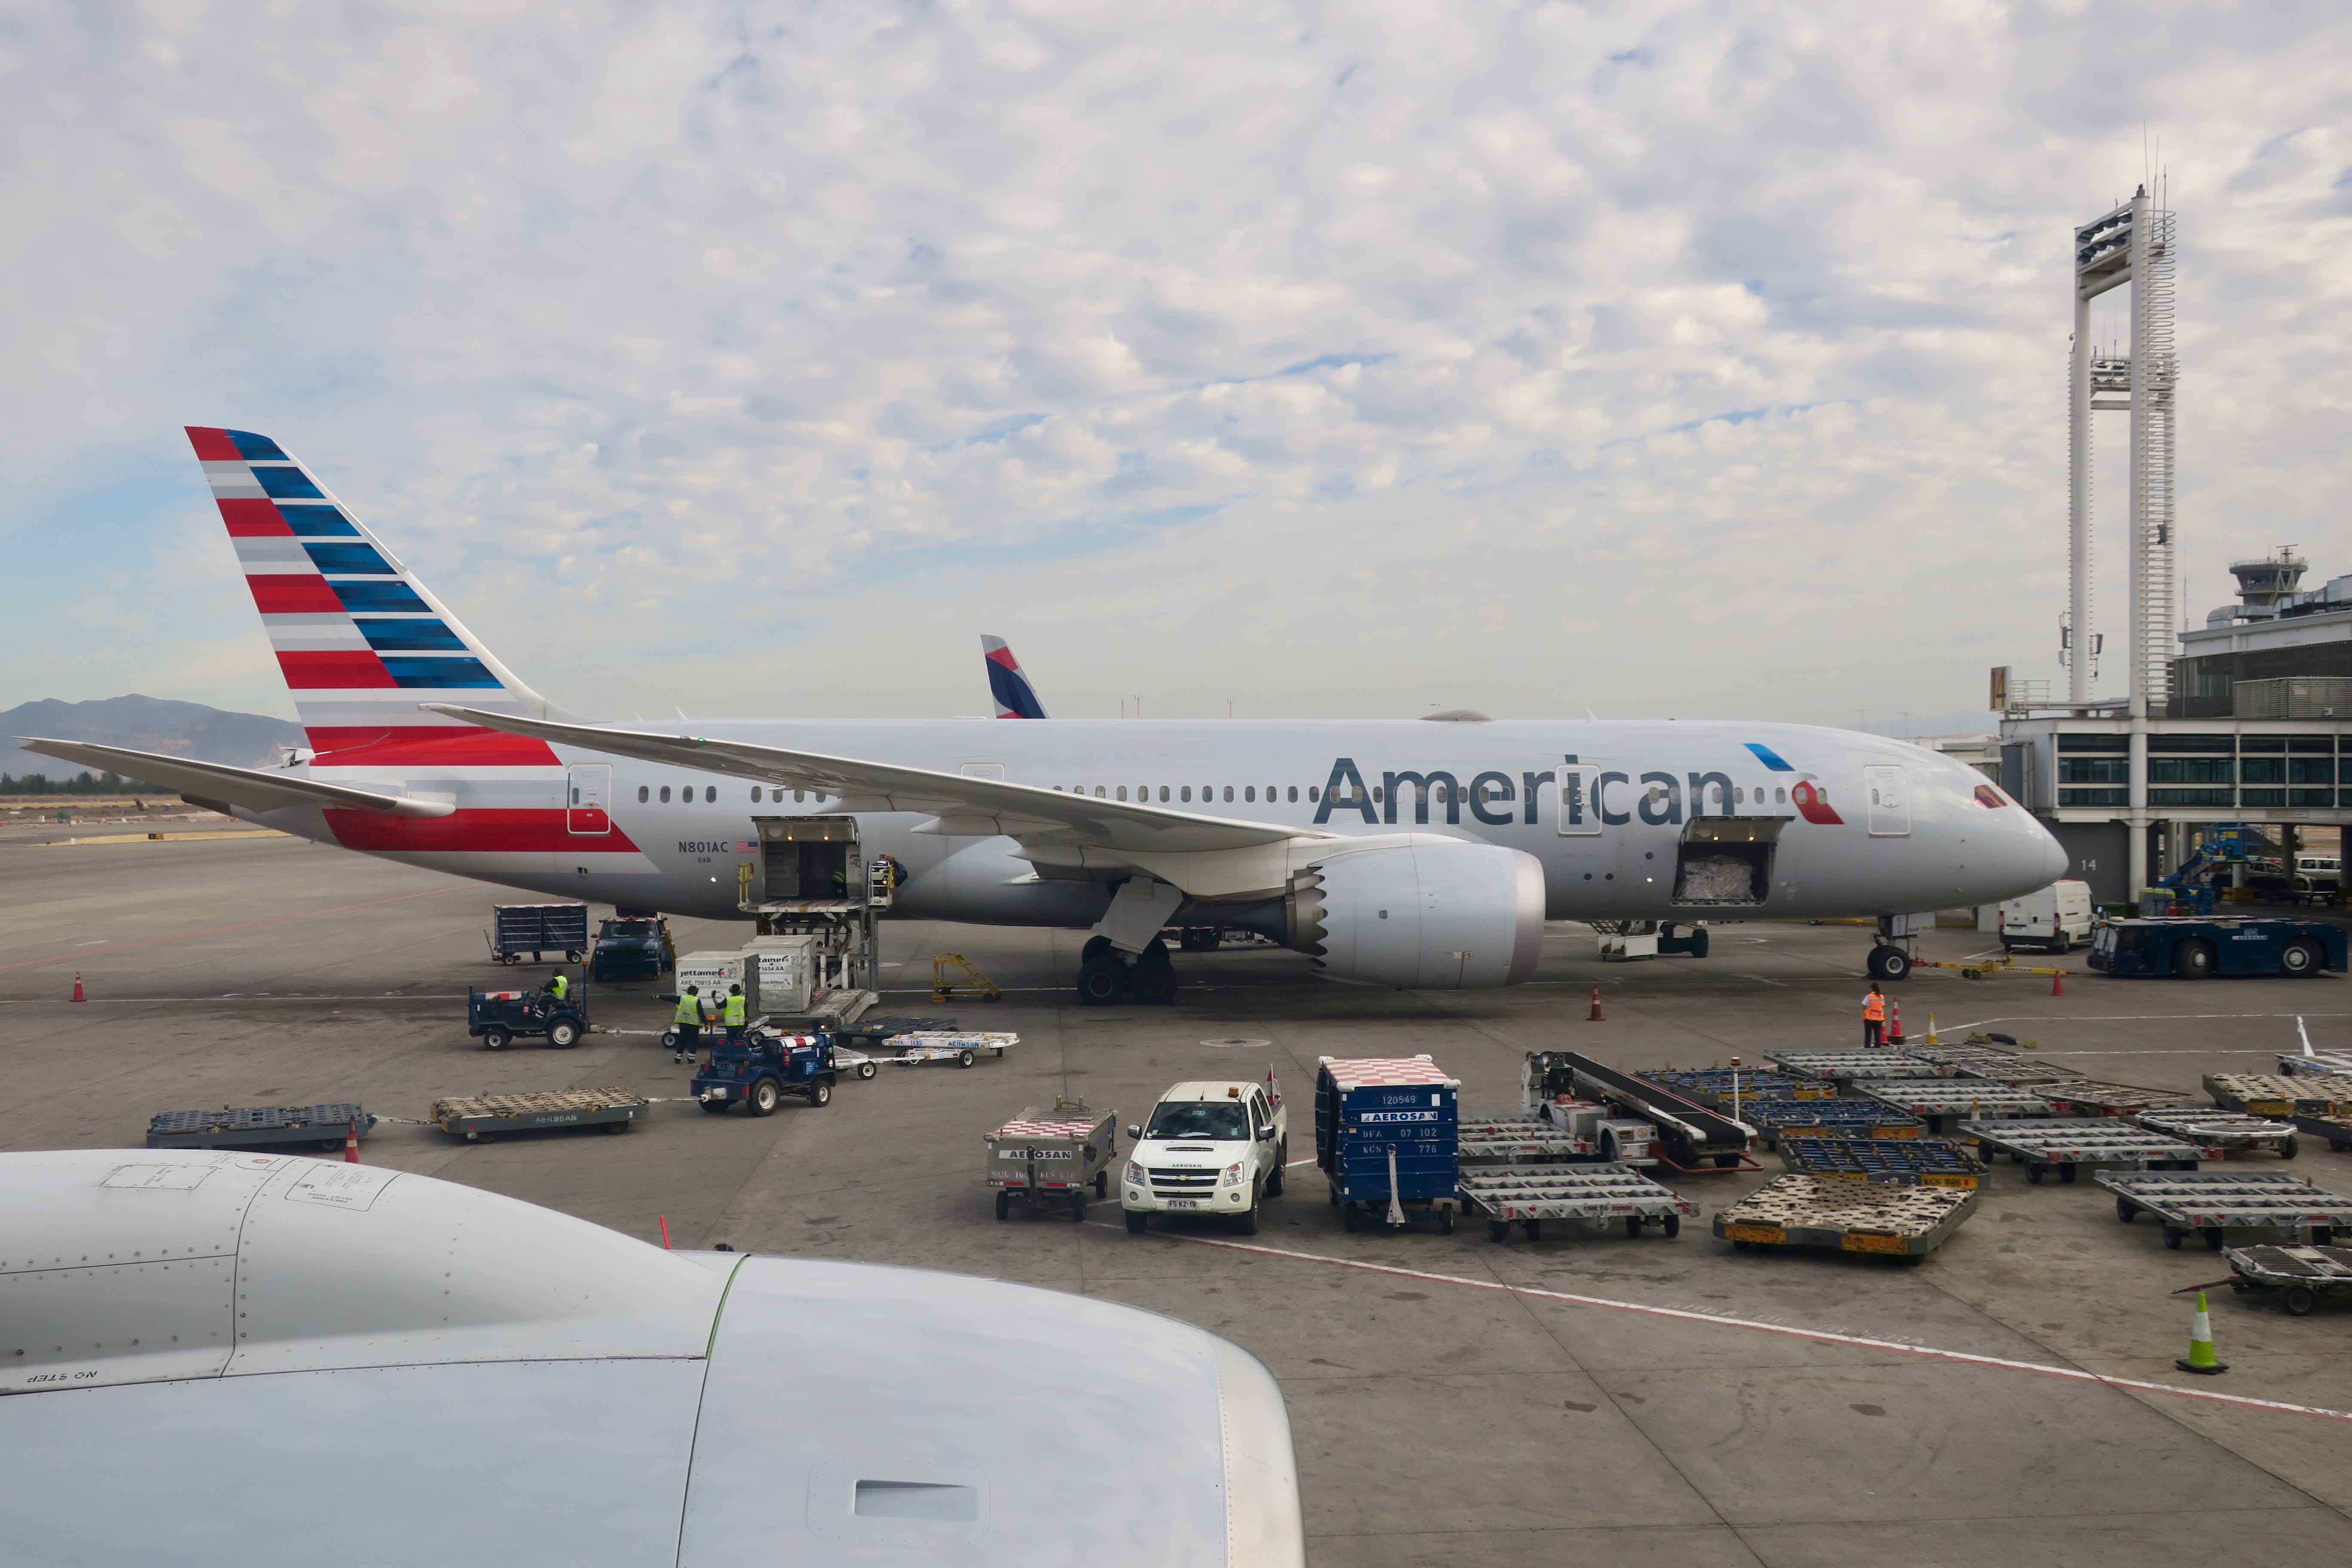 American Airlines plane on tarmac